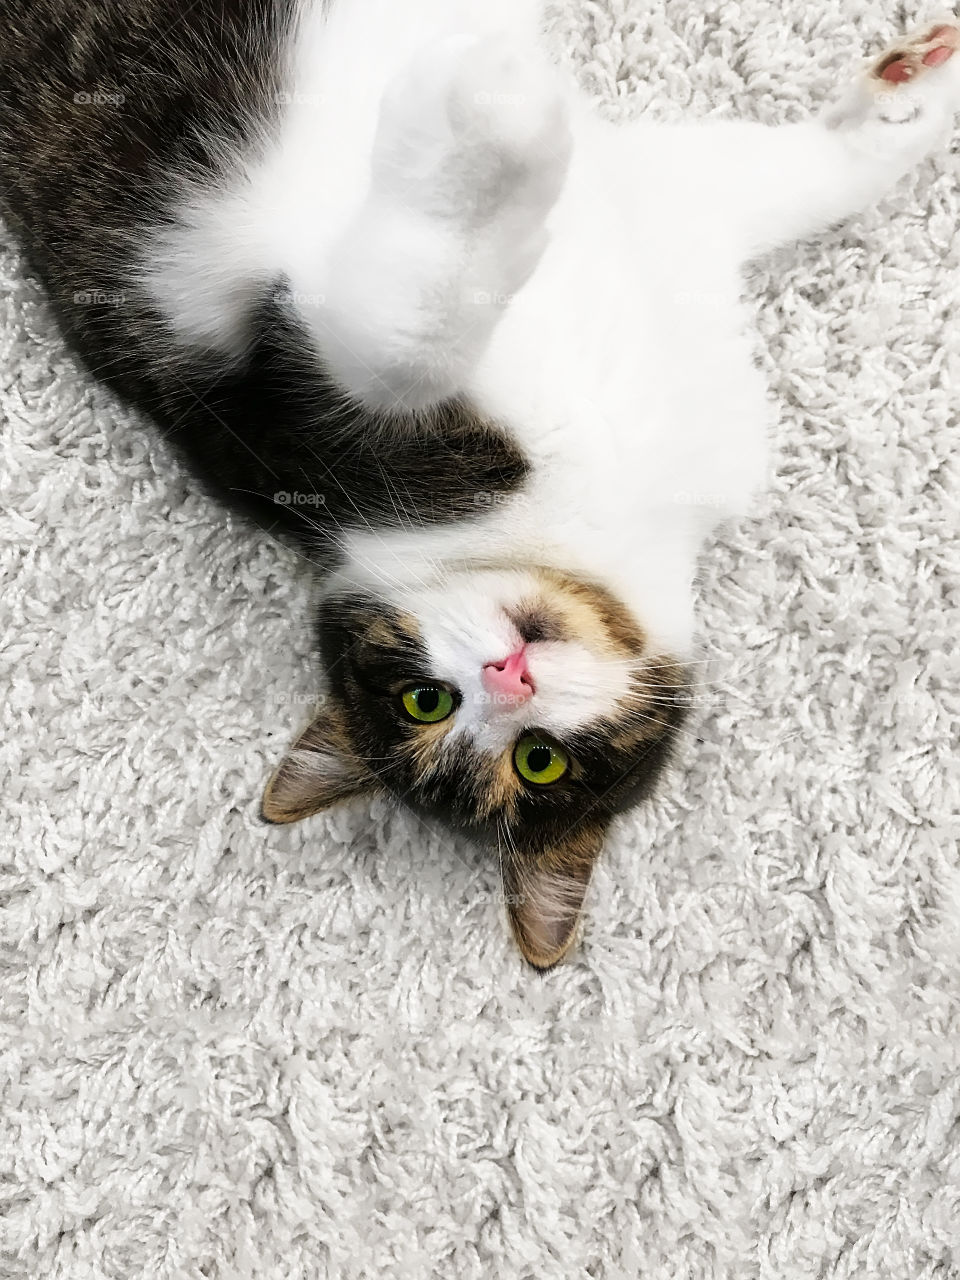 Cute playful cat with green eyes upside down on white furry carpet 